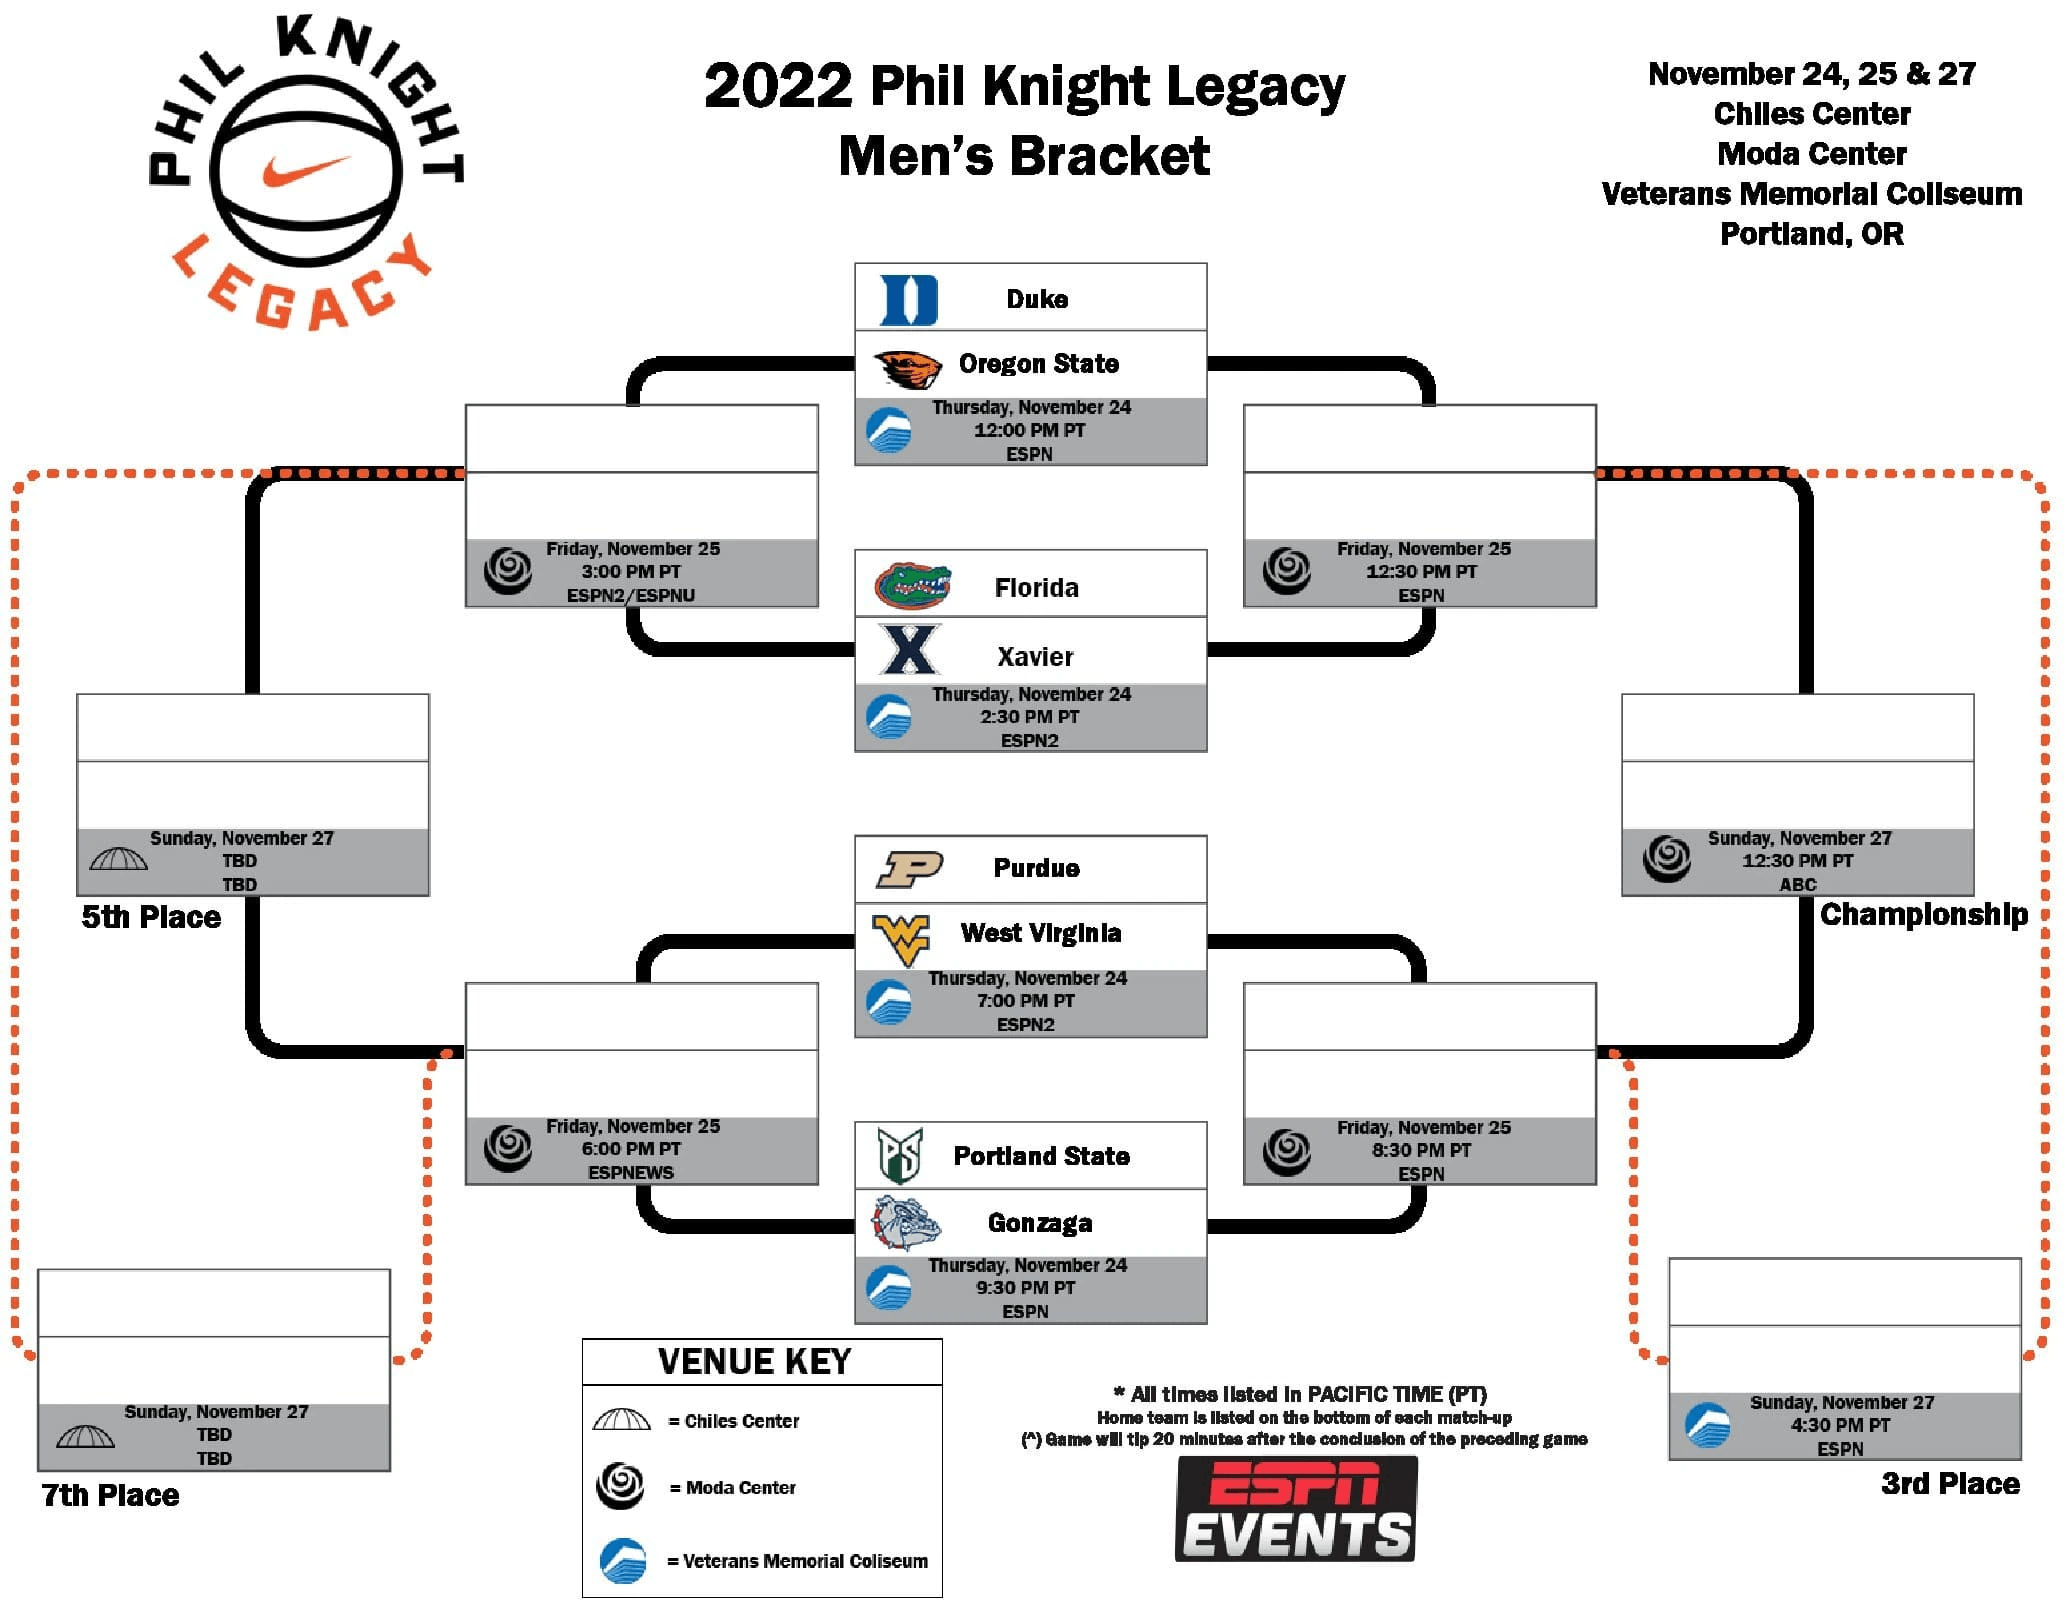 2022 Phil Knight Legacy Bracket, Odds & Predictions for FirstRound